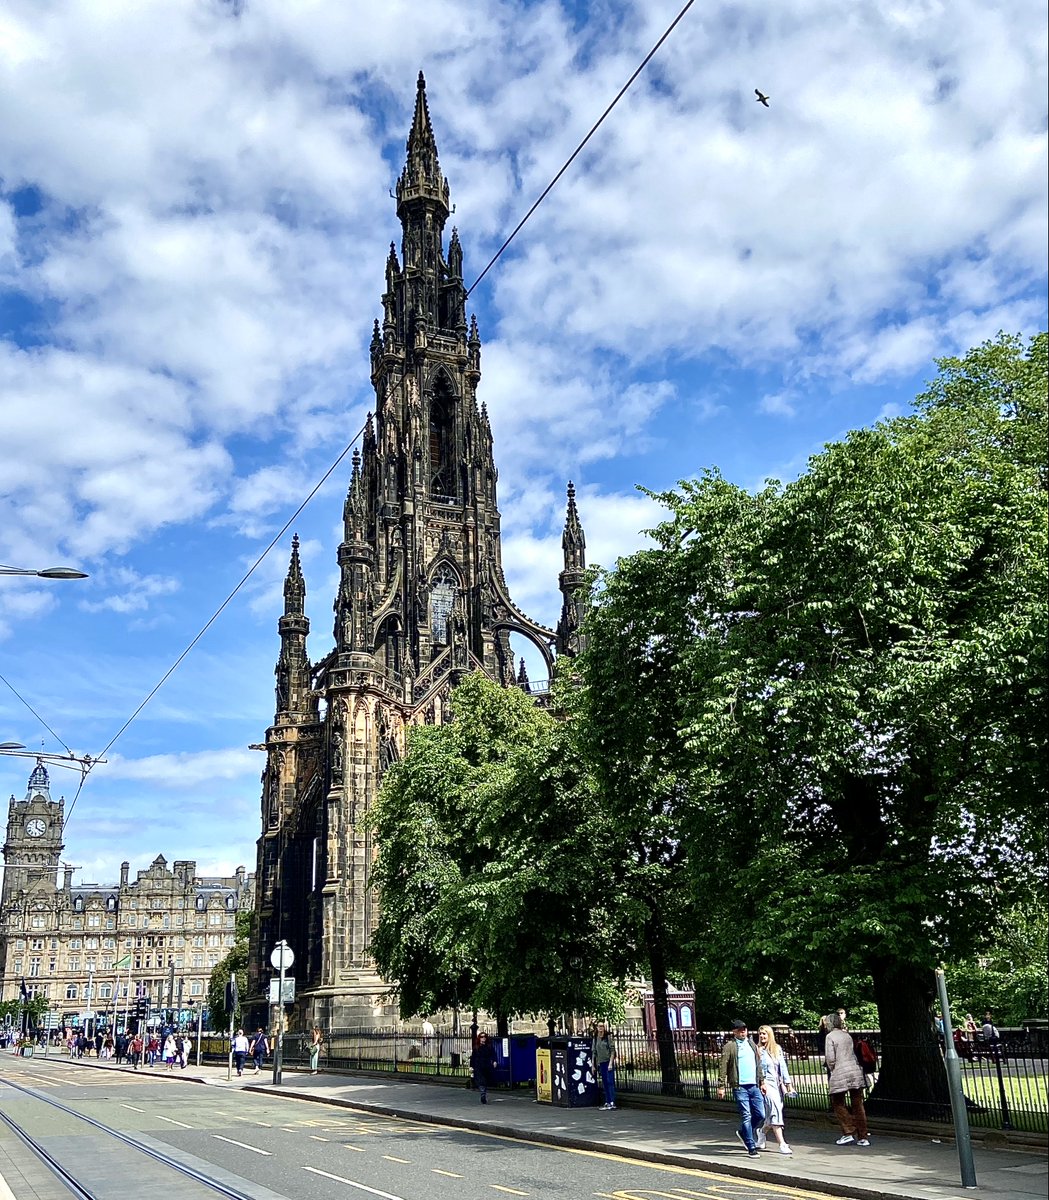 The Trip Advisor Travellers’ Choice Best of the Best award winners have been announced and we're delighted to see Edinburgh on the Popular Destinations in World list.

#Edinburgh #PopularDestinations